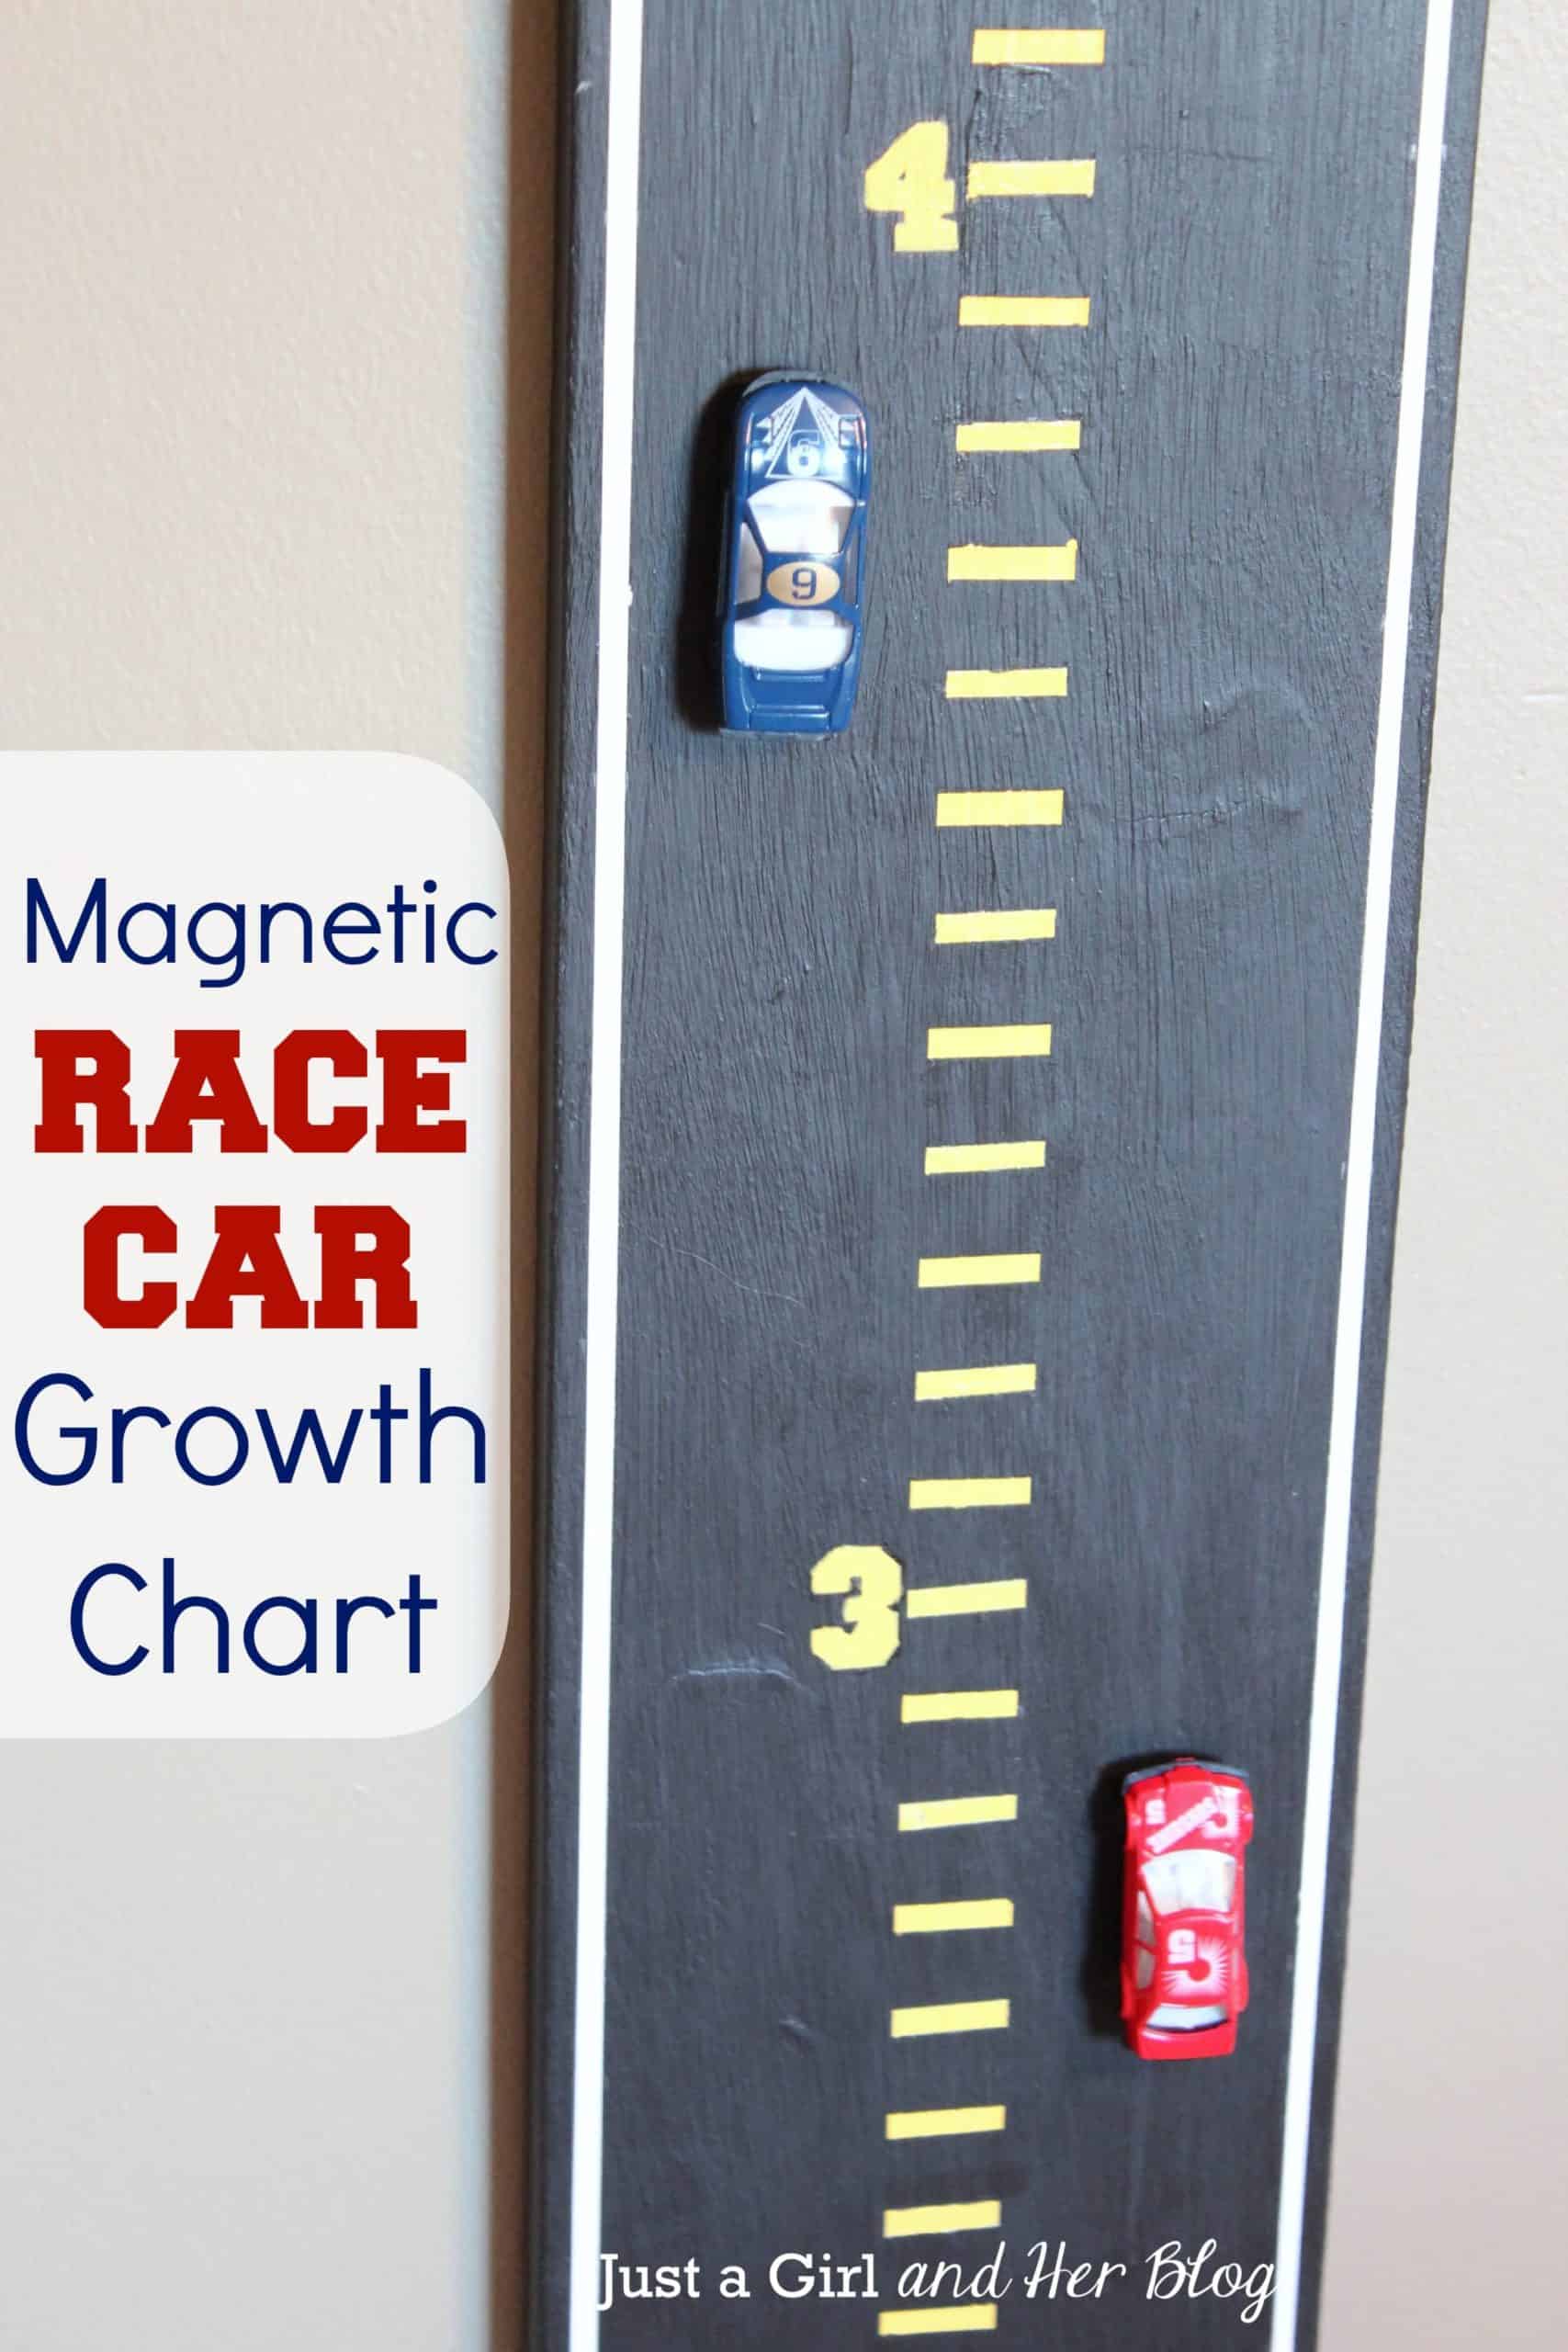 Magnetic race car growth chart